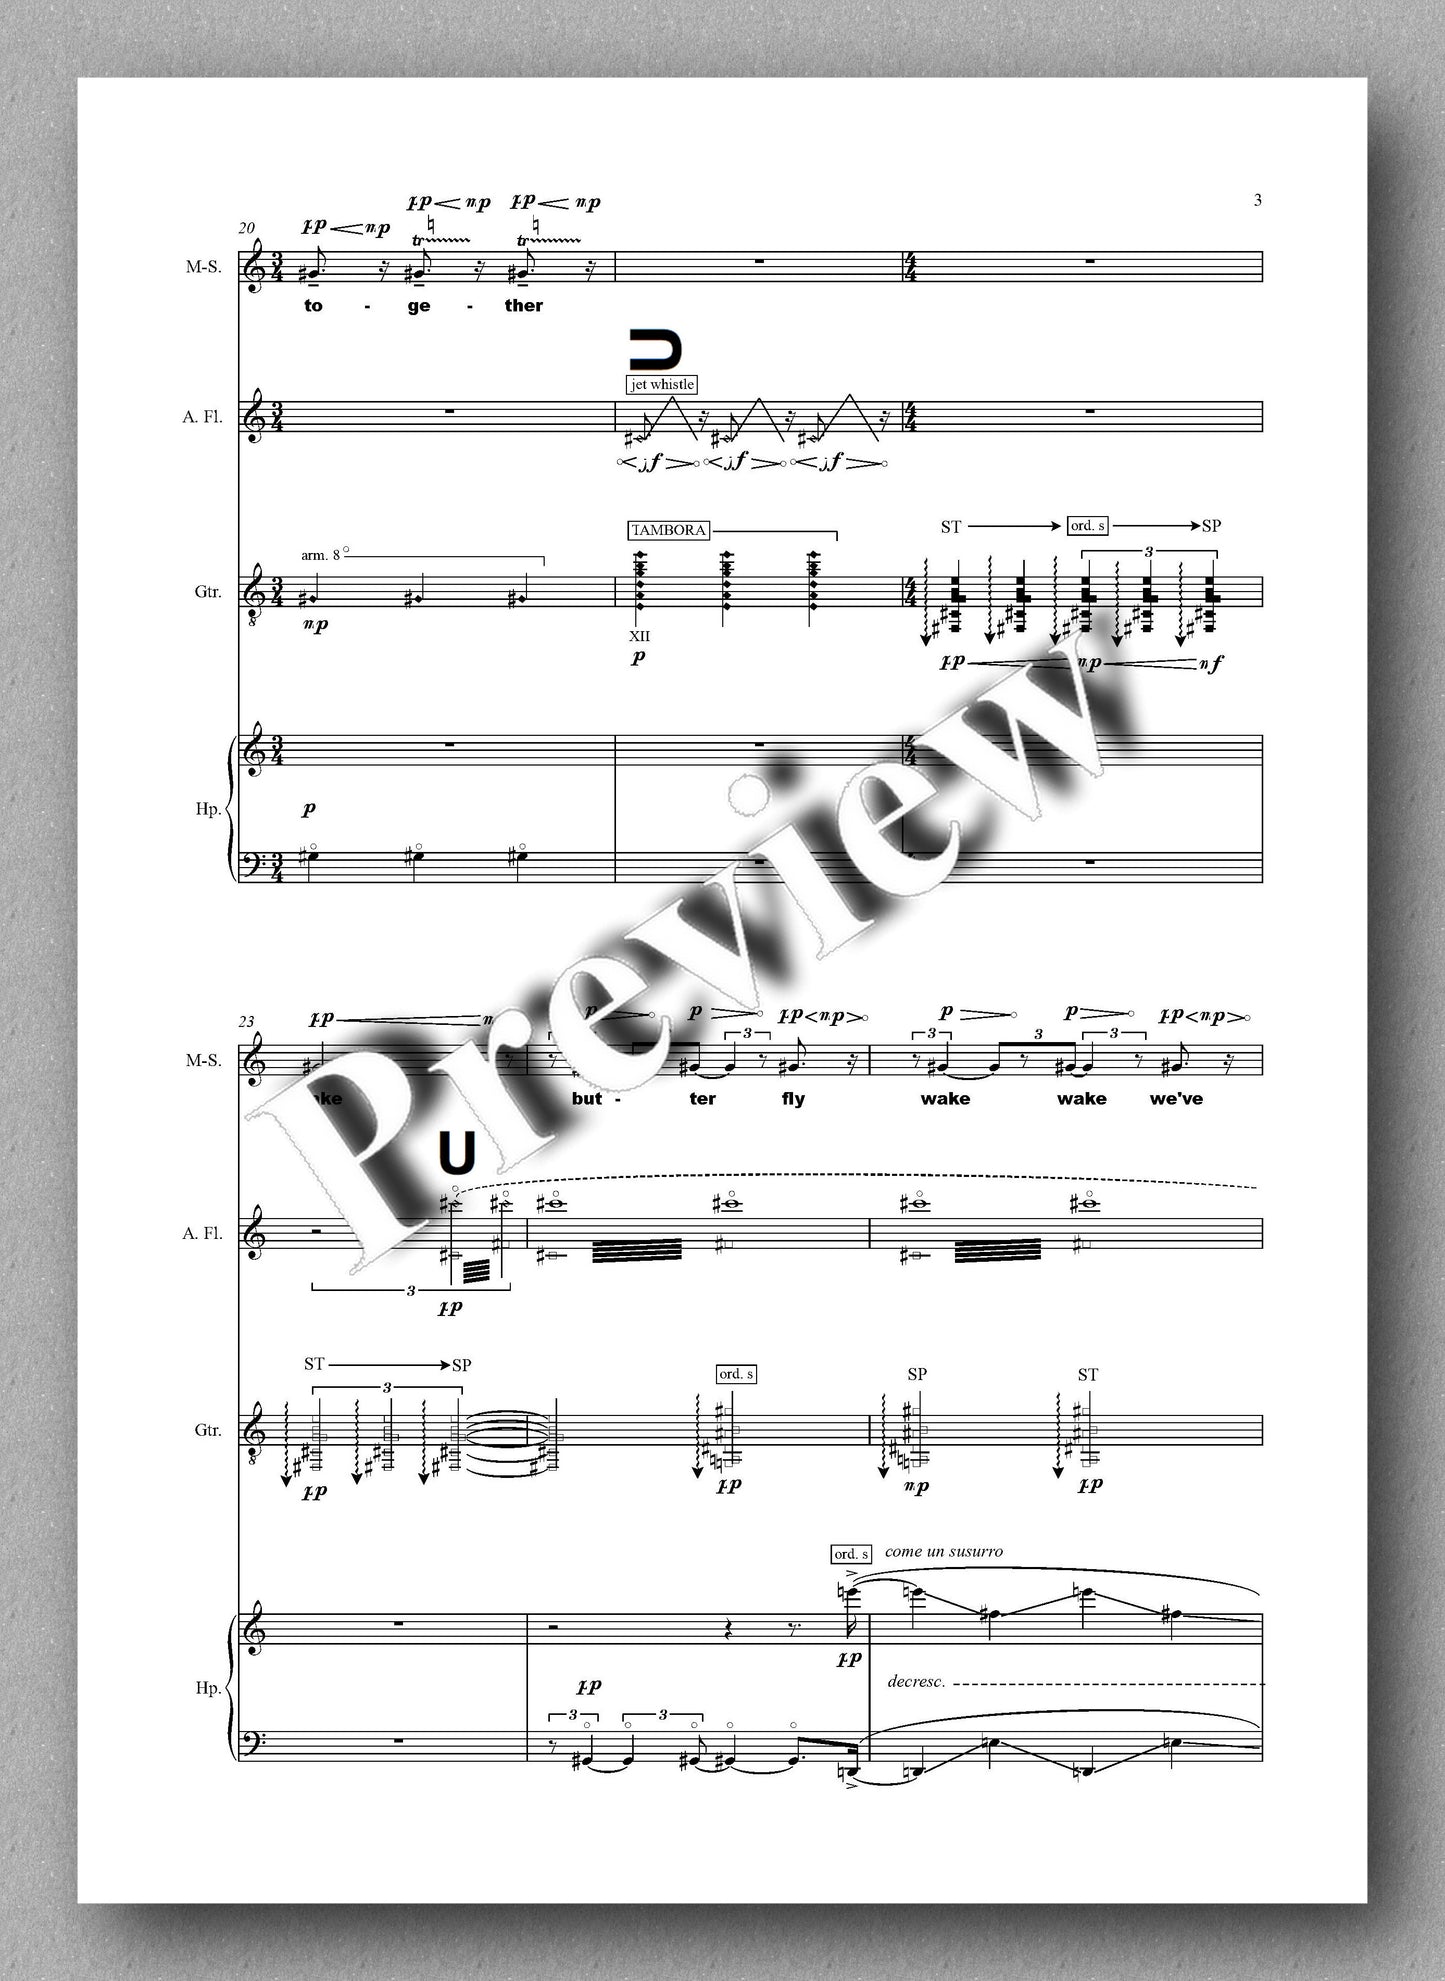 Louis Franz Aguirre, Butterfly's Wings - preview of the music score 3